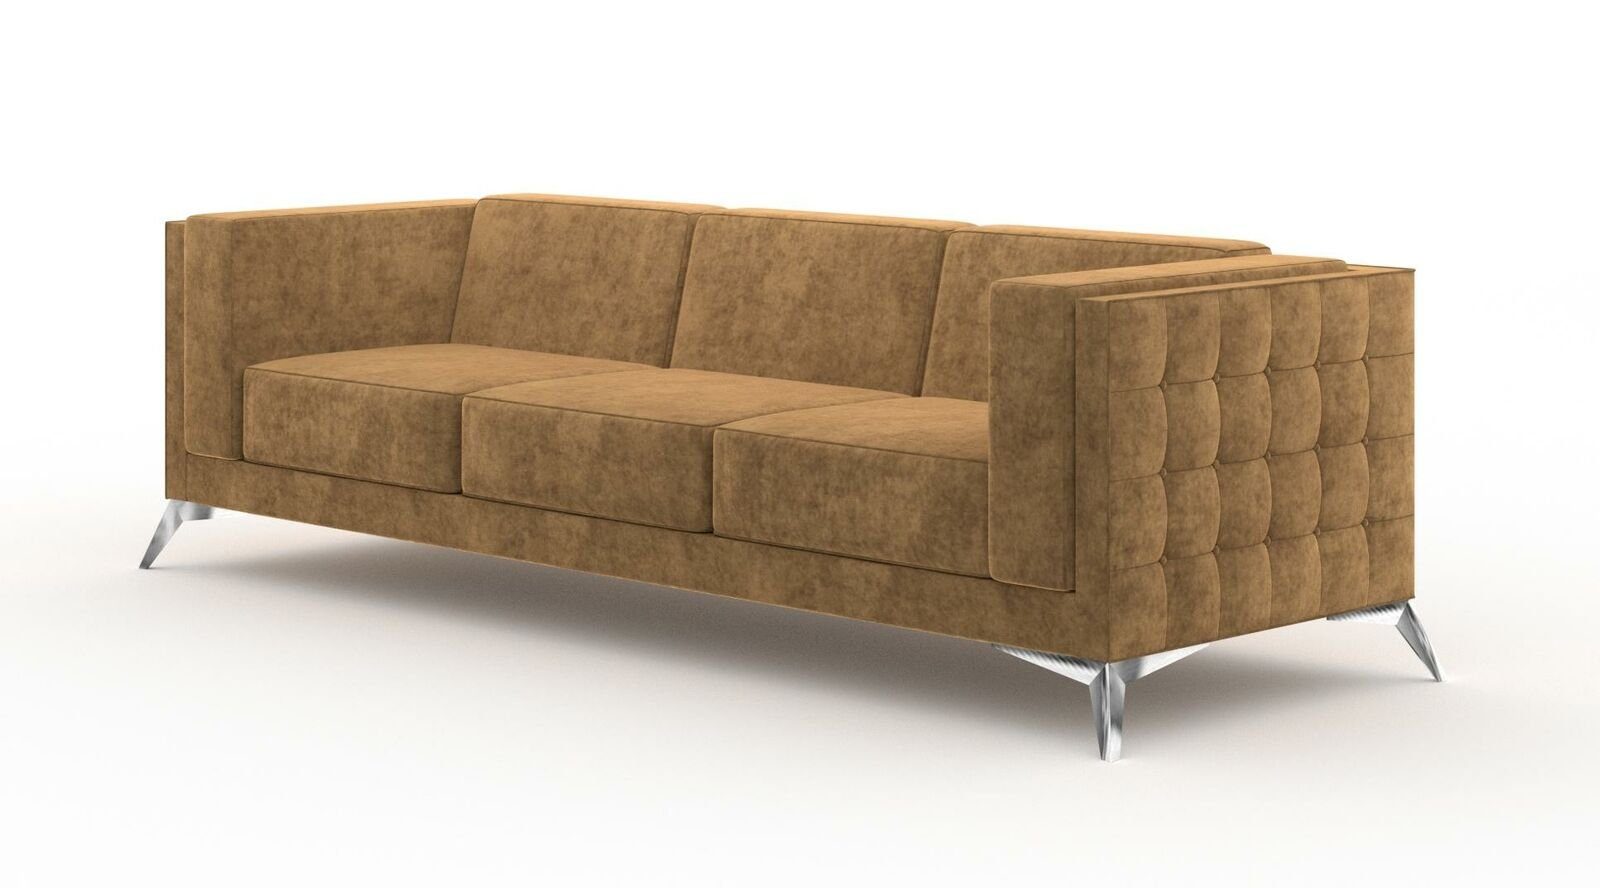 Made Chesterfield Dreisitzer, in Polster Textil Sofa Couch JVmoebel Sofa Stoff Europe Couchen